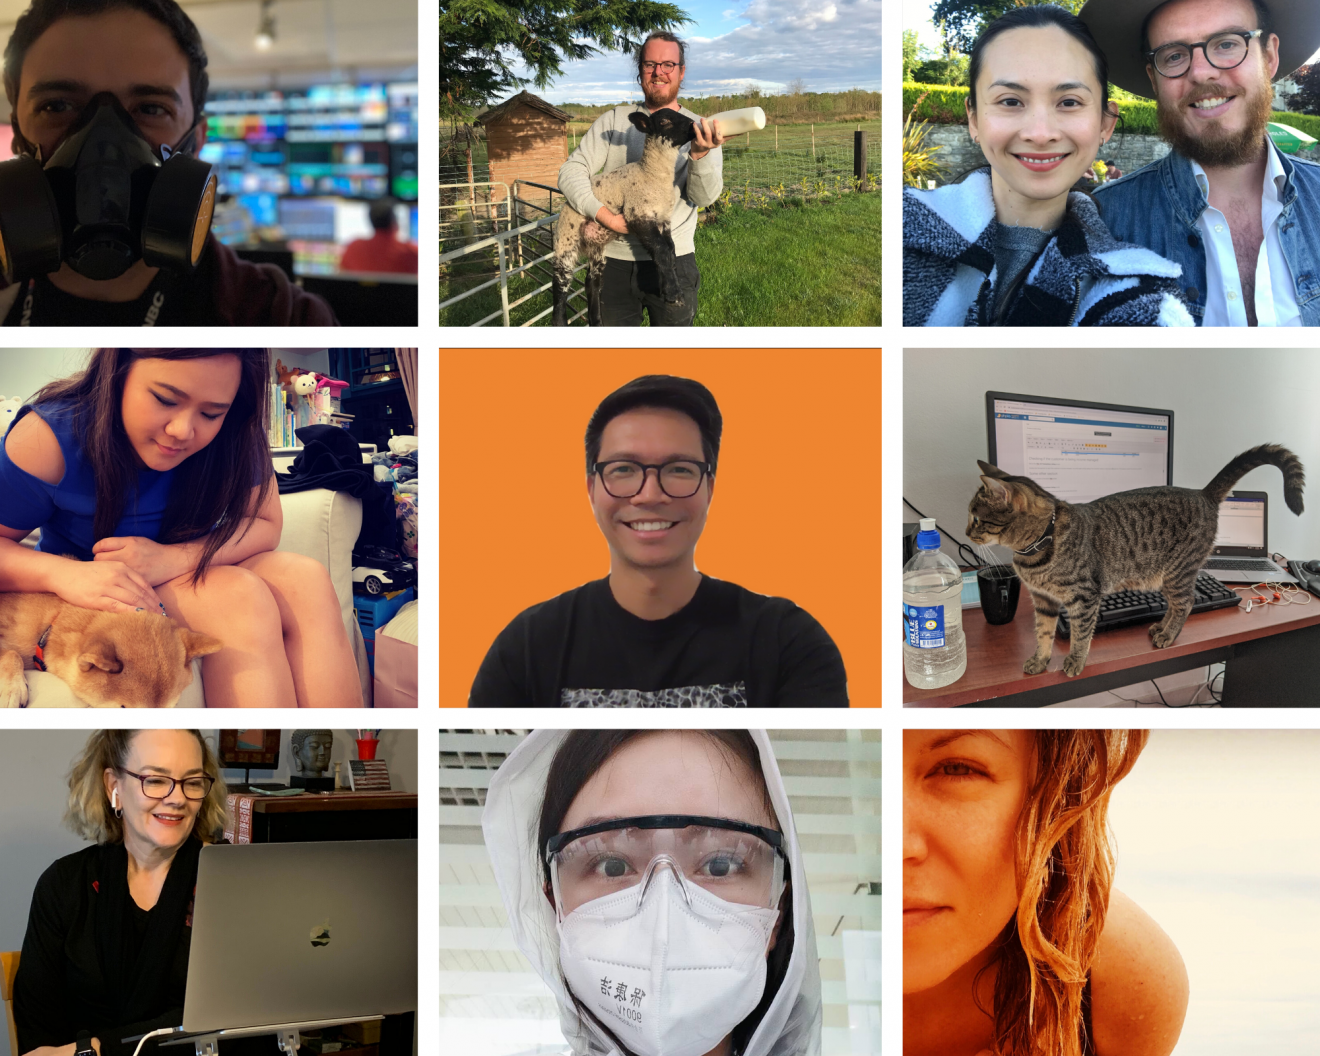 A nine square collage of images. L to R top row: man in news studio wearing PPE mask; man feeding baby calf in Irish farmland; selfie image of man and woman. L to R second row: girl patting a dog, man in Zoom video-conference, cat at a computer desk. L to R bottom row: woman sitting at her computer, girl wearing white PPE mask, hood and protective glasses; selfie of girl at beach